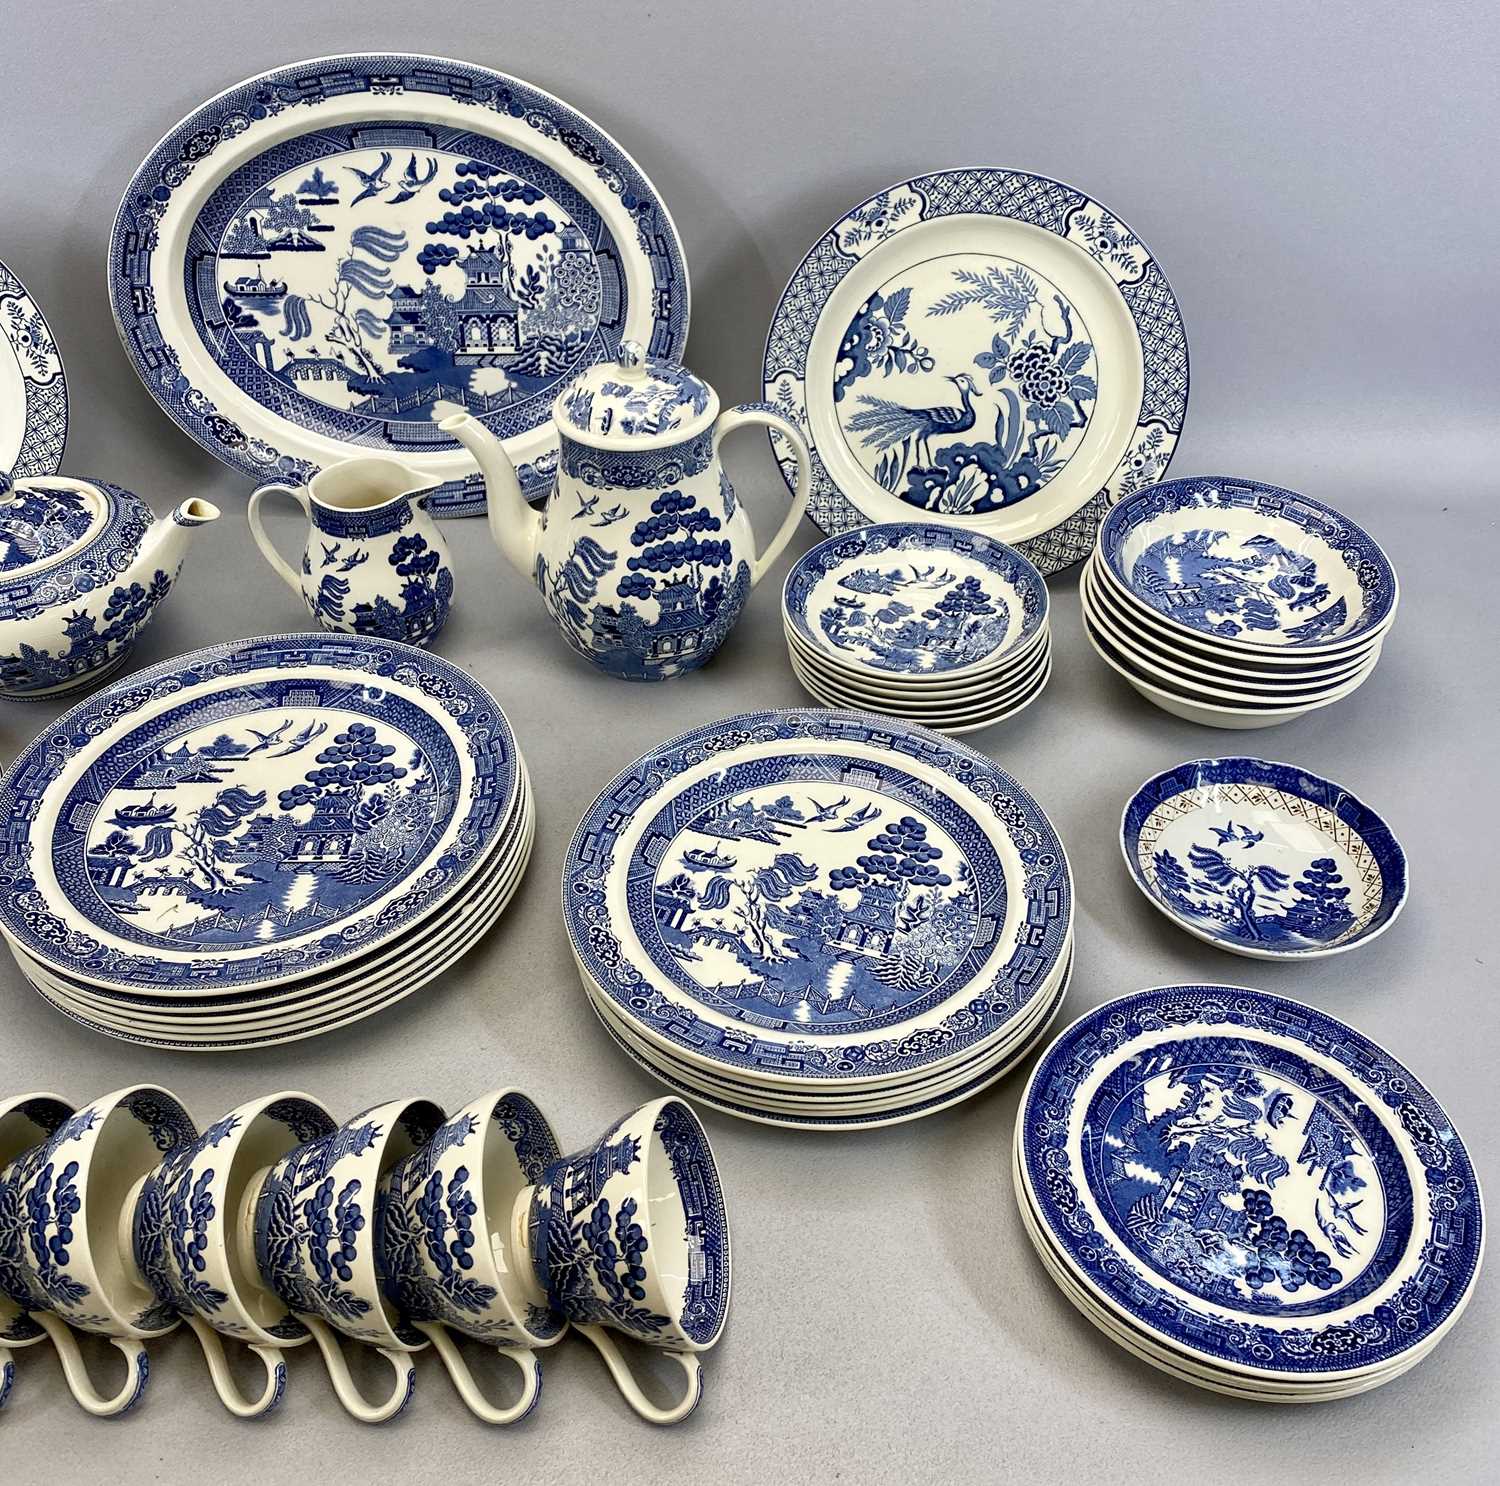 WEDGWOOD 'WILLOW PATTERN' BLUE & WHITE TABLEWARE, 6 x circular plates, 23.5cms diam., 1 x oval - Image 3 of 3